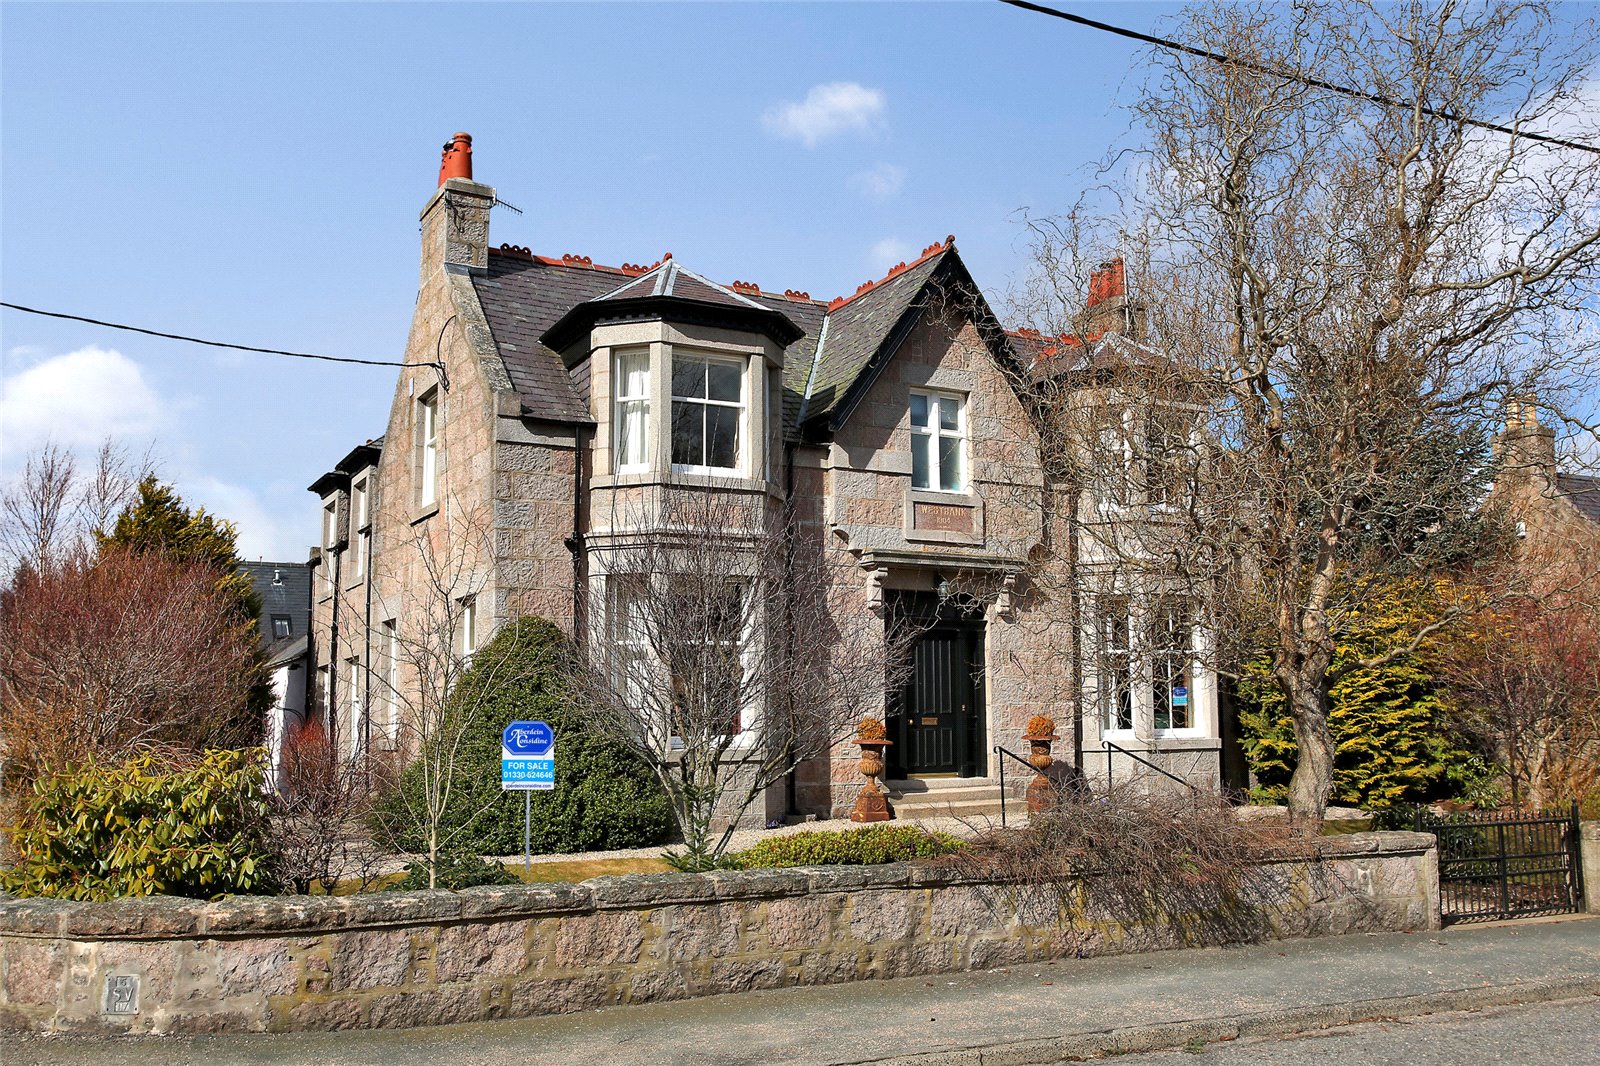 Grand period home in the Royal Deeside 